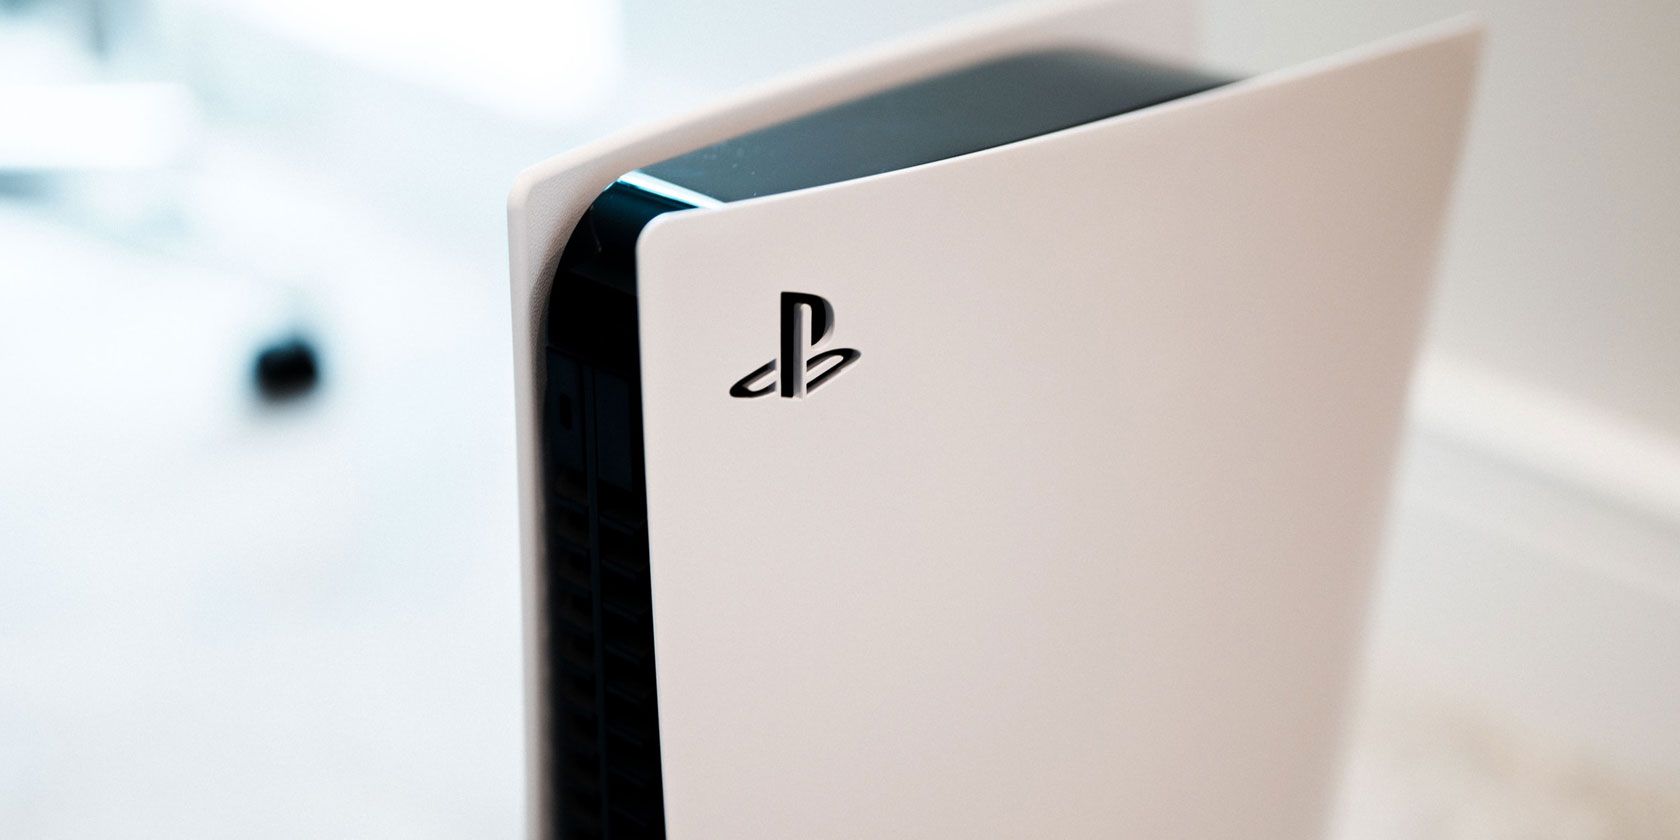 How to Rotate Your PlayStation 5 From Vertical to Horizontal (and Vice Versa)